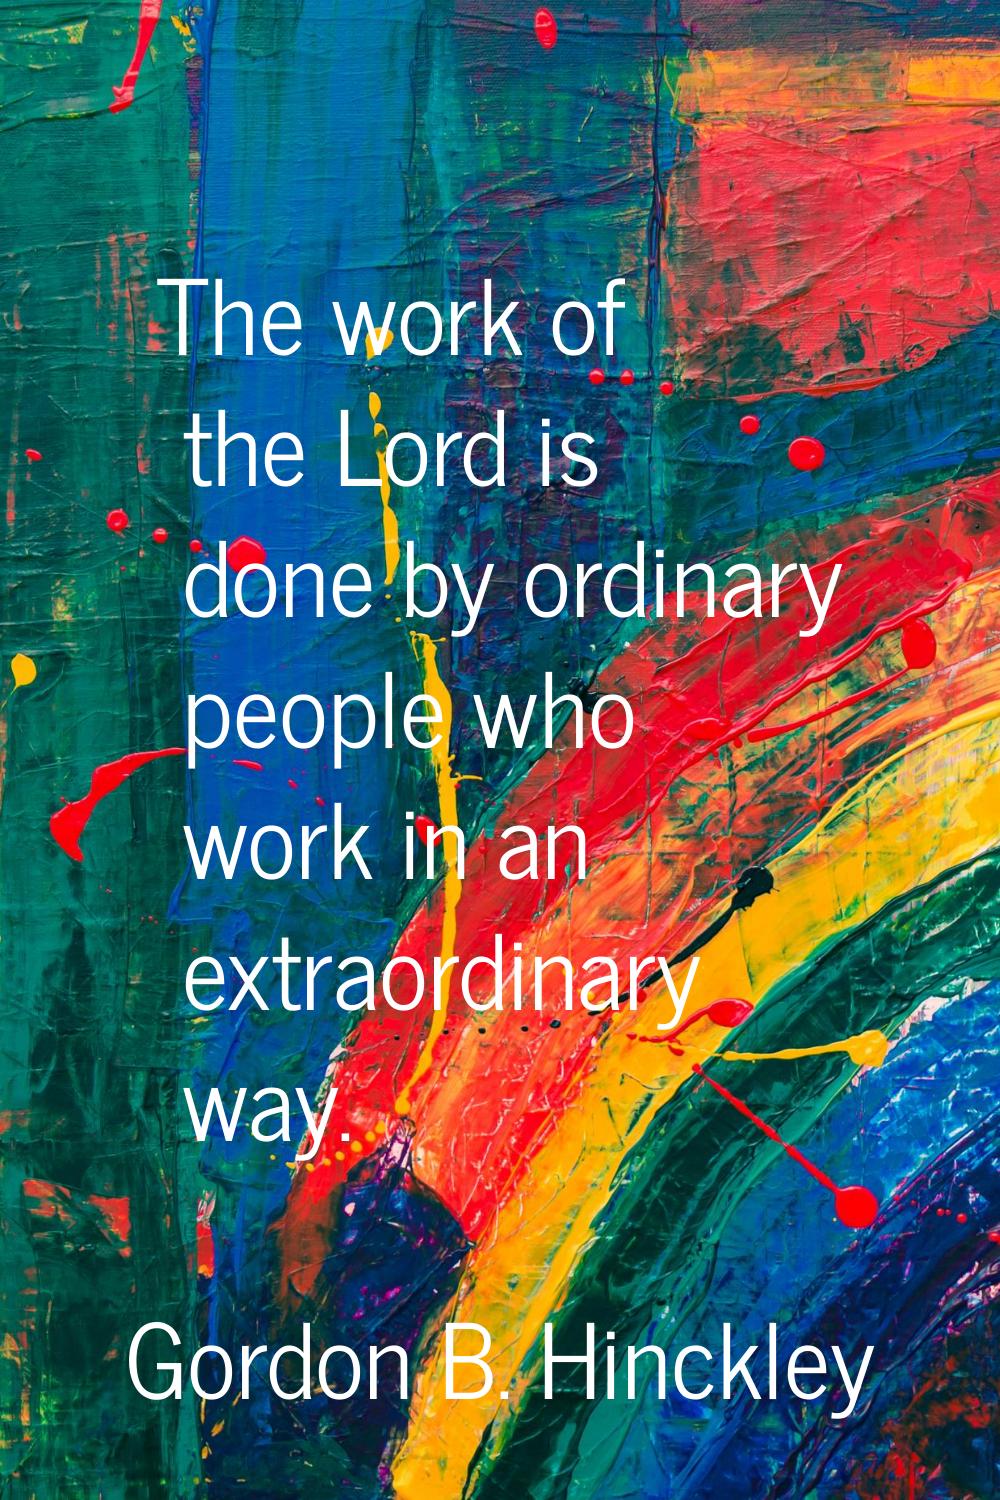 The work of the Lord is done by ordinary people who work in an extraordinary way.